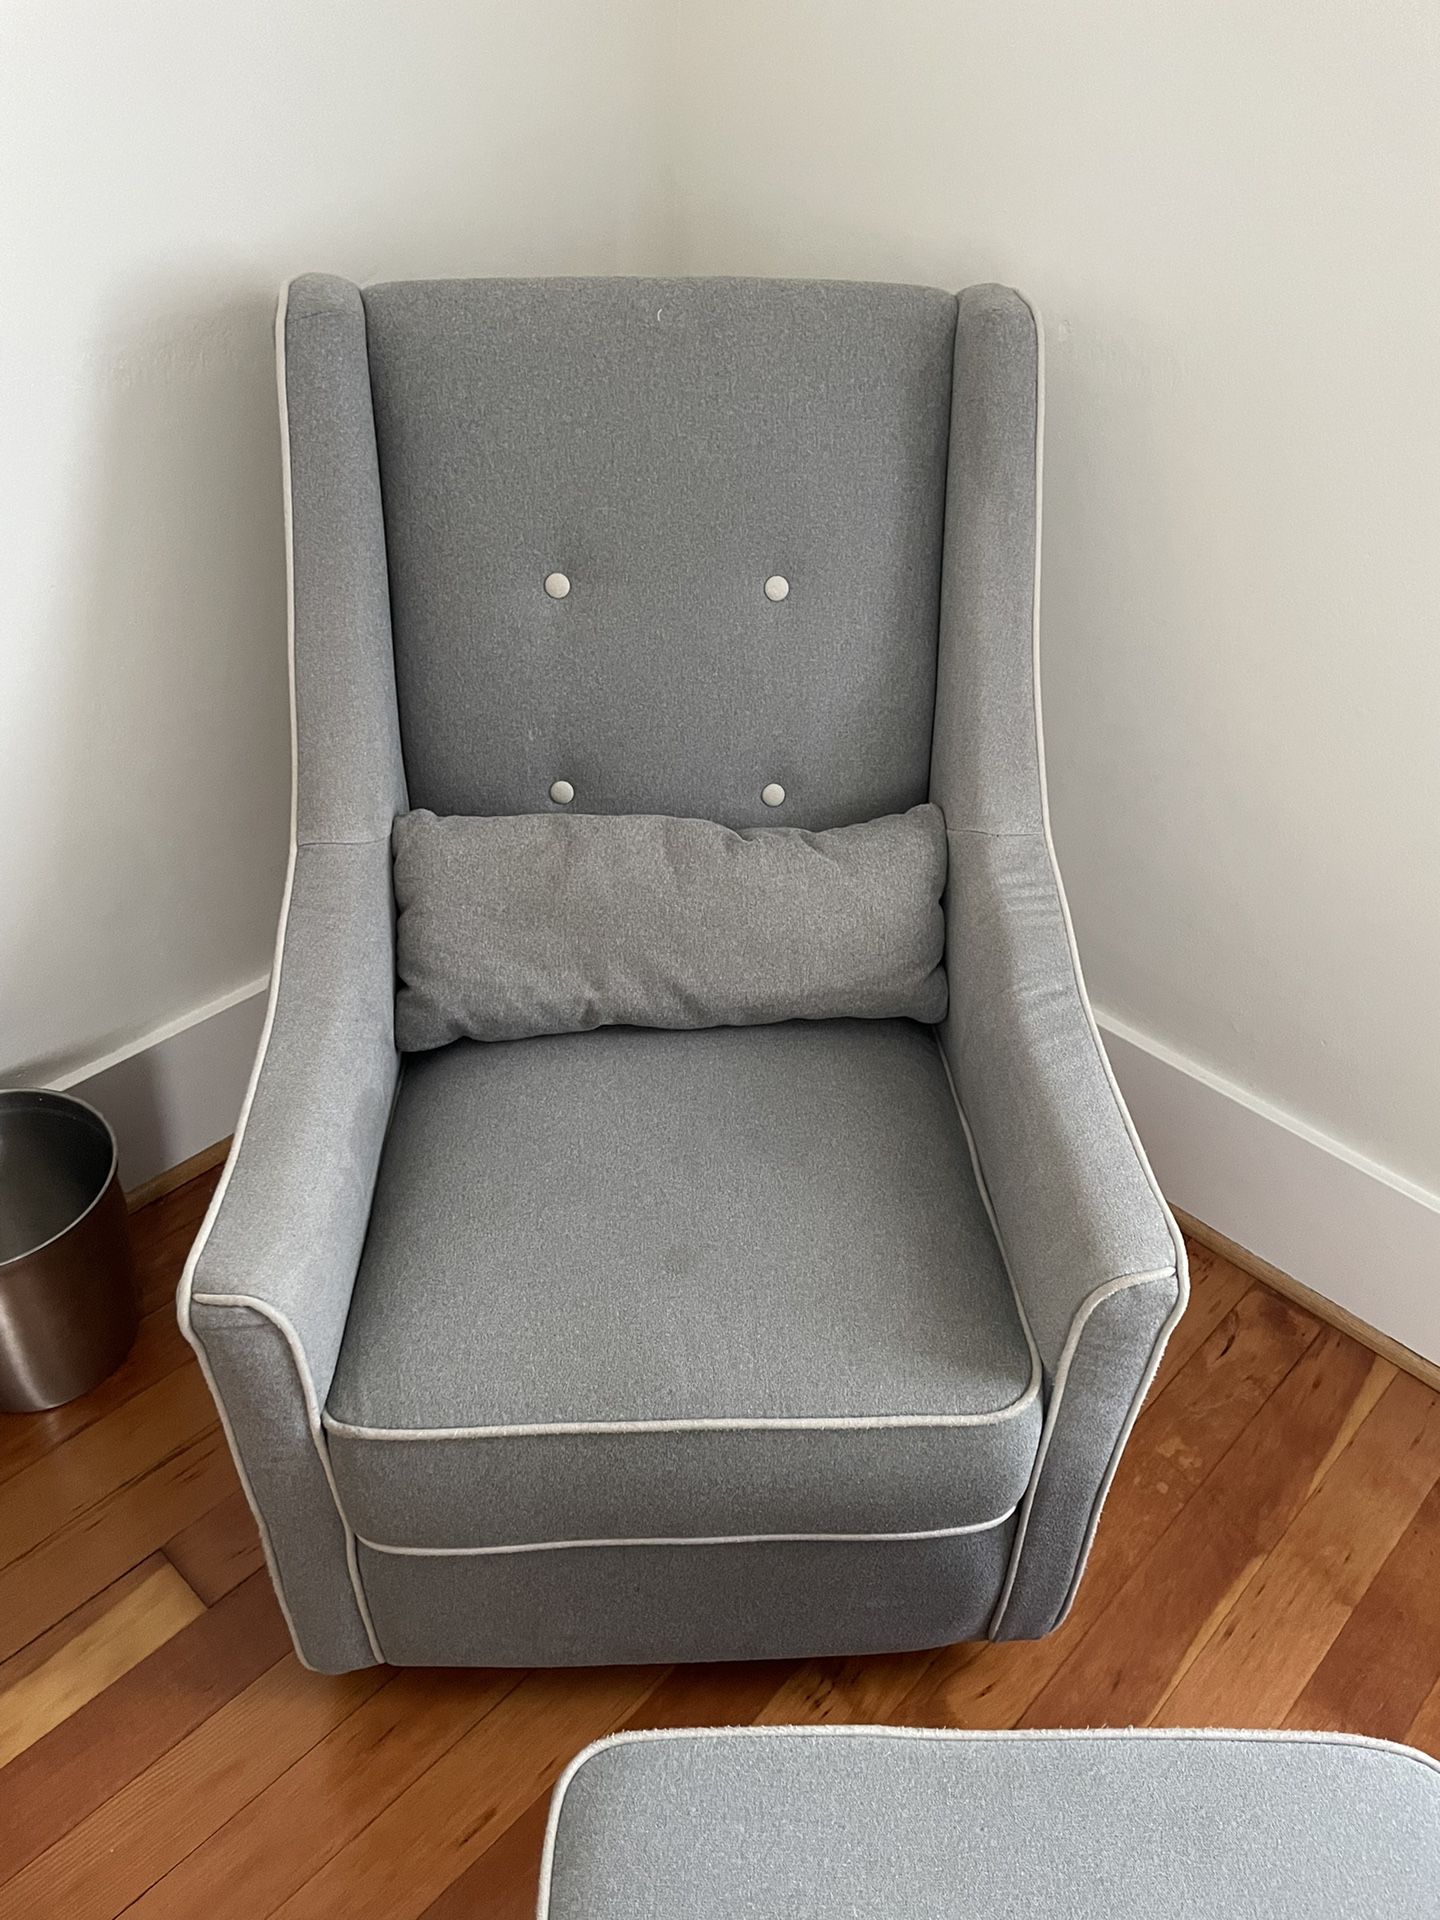 Free! Target rocking chair and ottoman